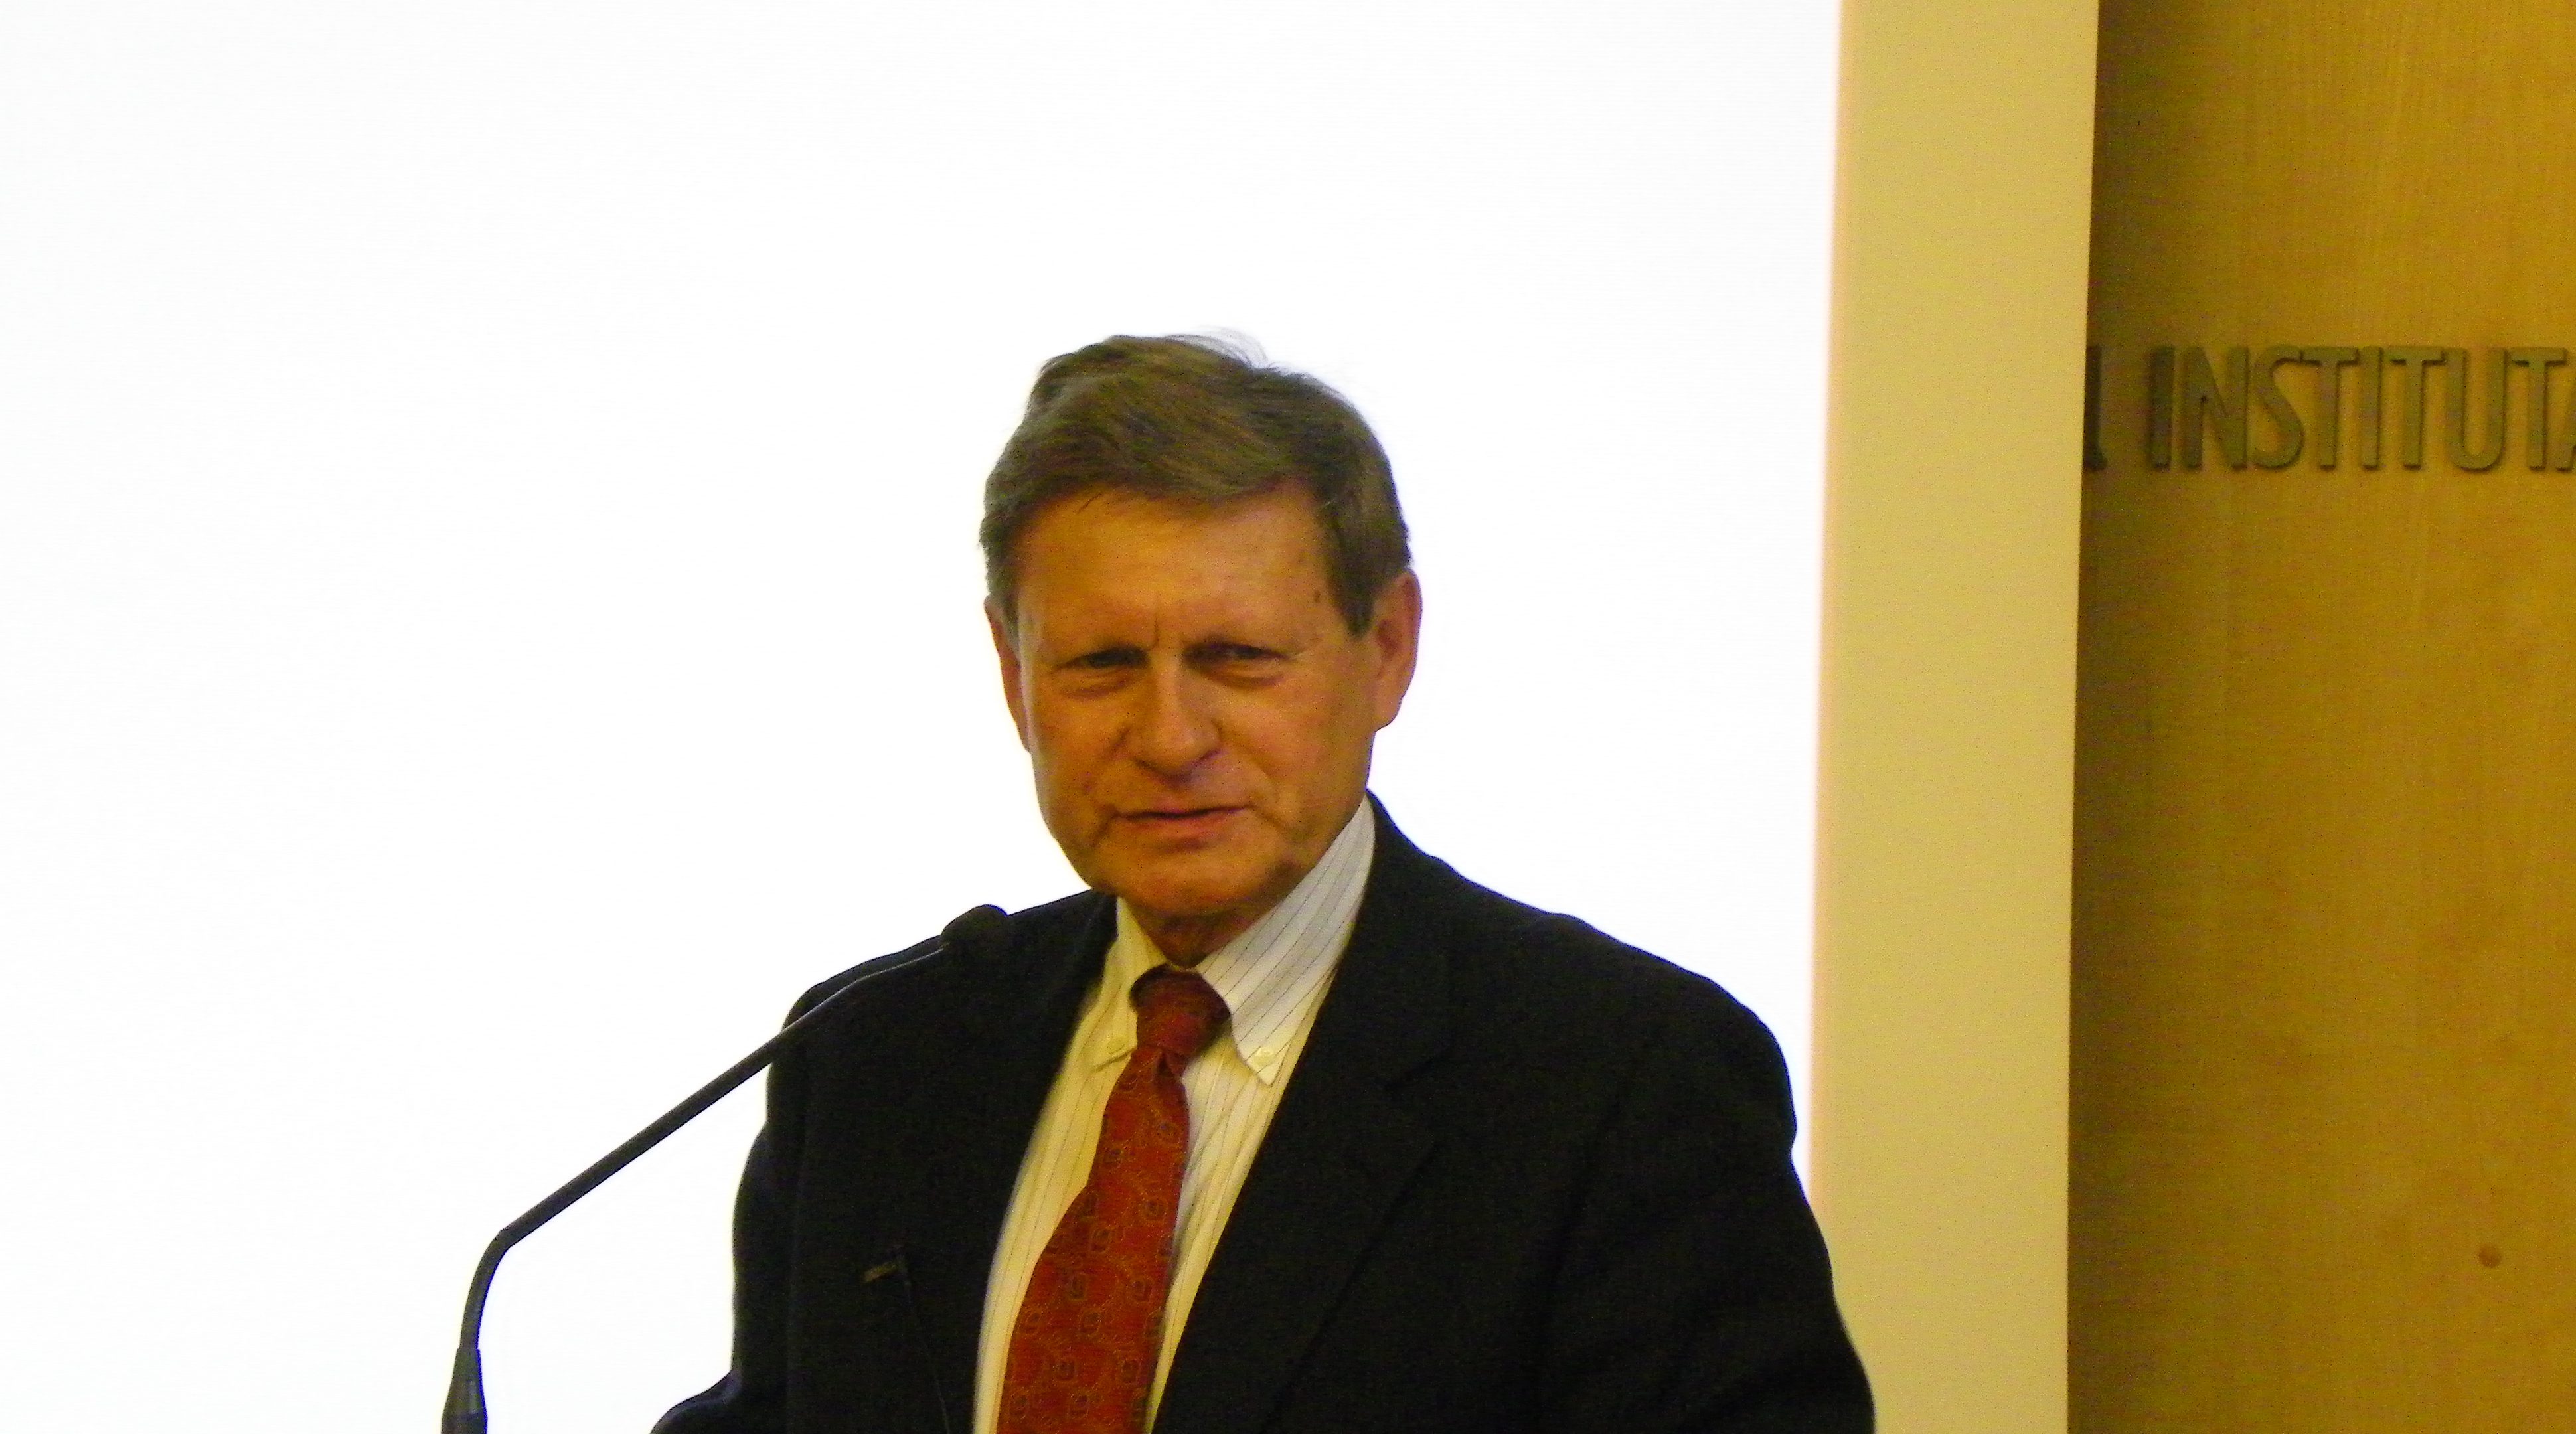 Public lecture by prof. Leszek Balcerowicz „The ways out of the euro zone crisis and the interests of non-euro EU member states“